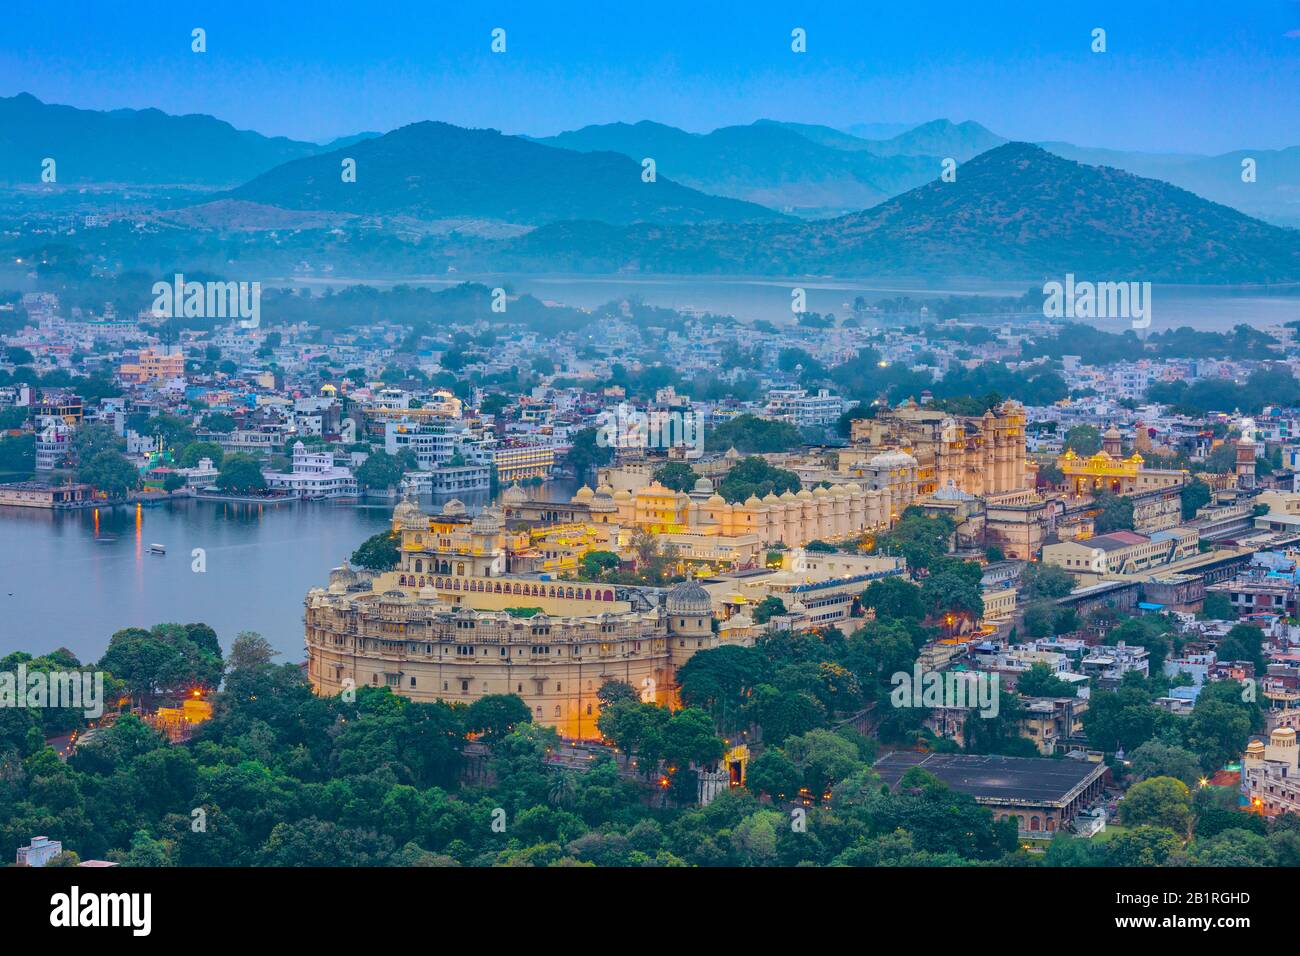 Aerial view of City Palace at night. Udaipur, Rajasthan, India Stock Photo